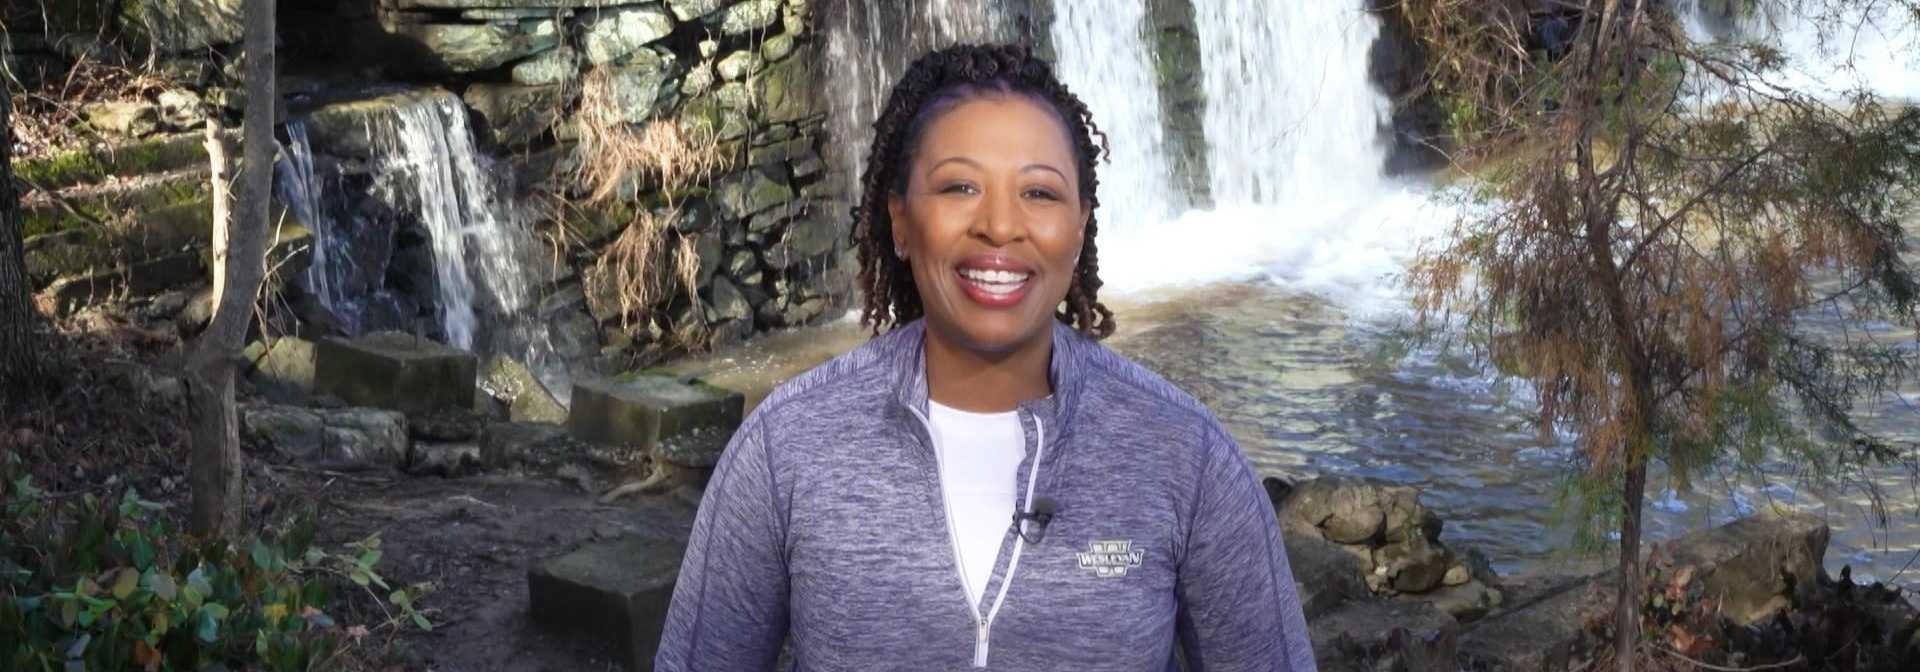 Deb Holt Noel standing in front of a rocky waterfall at a NC state park and smiling at the camera